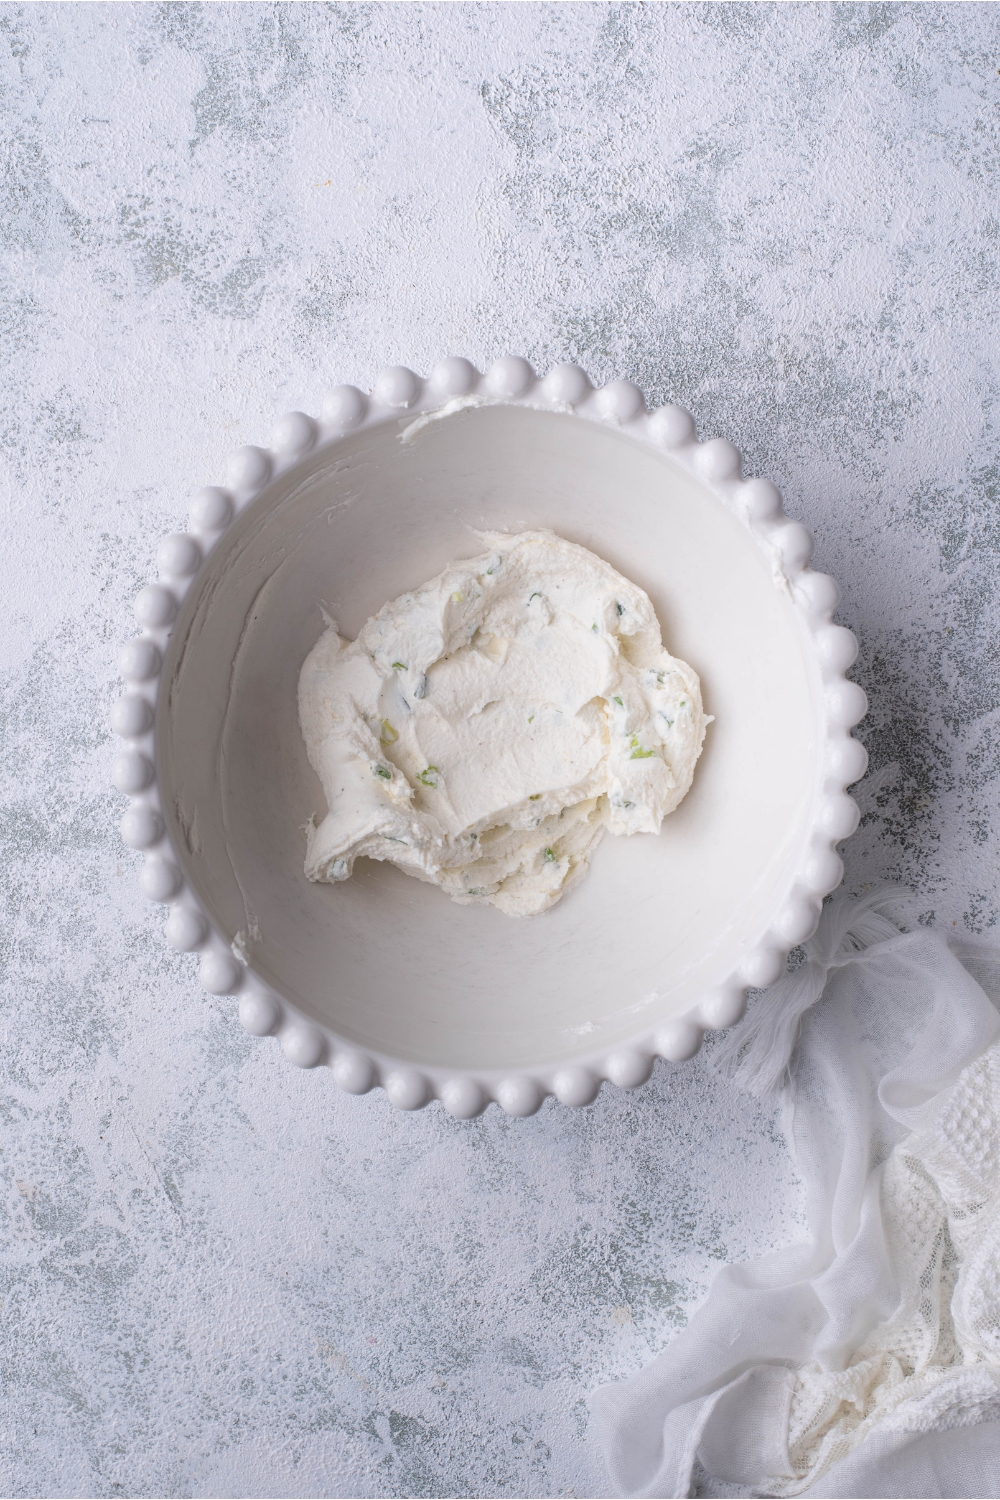 A decorative white bowl filled with cream cheese and green onion that have been mixed together.